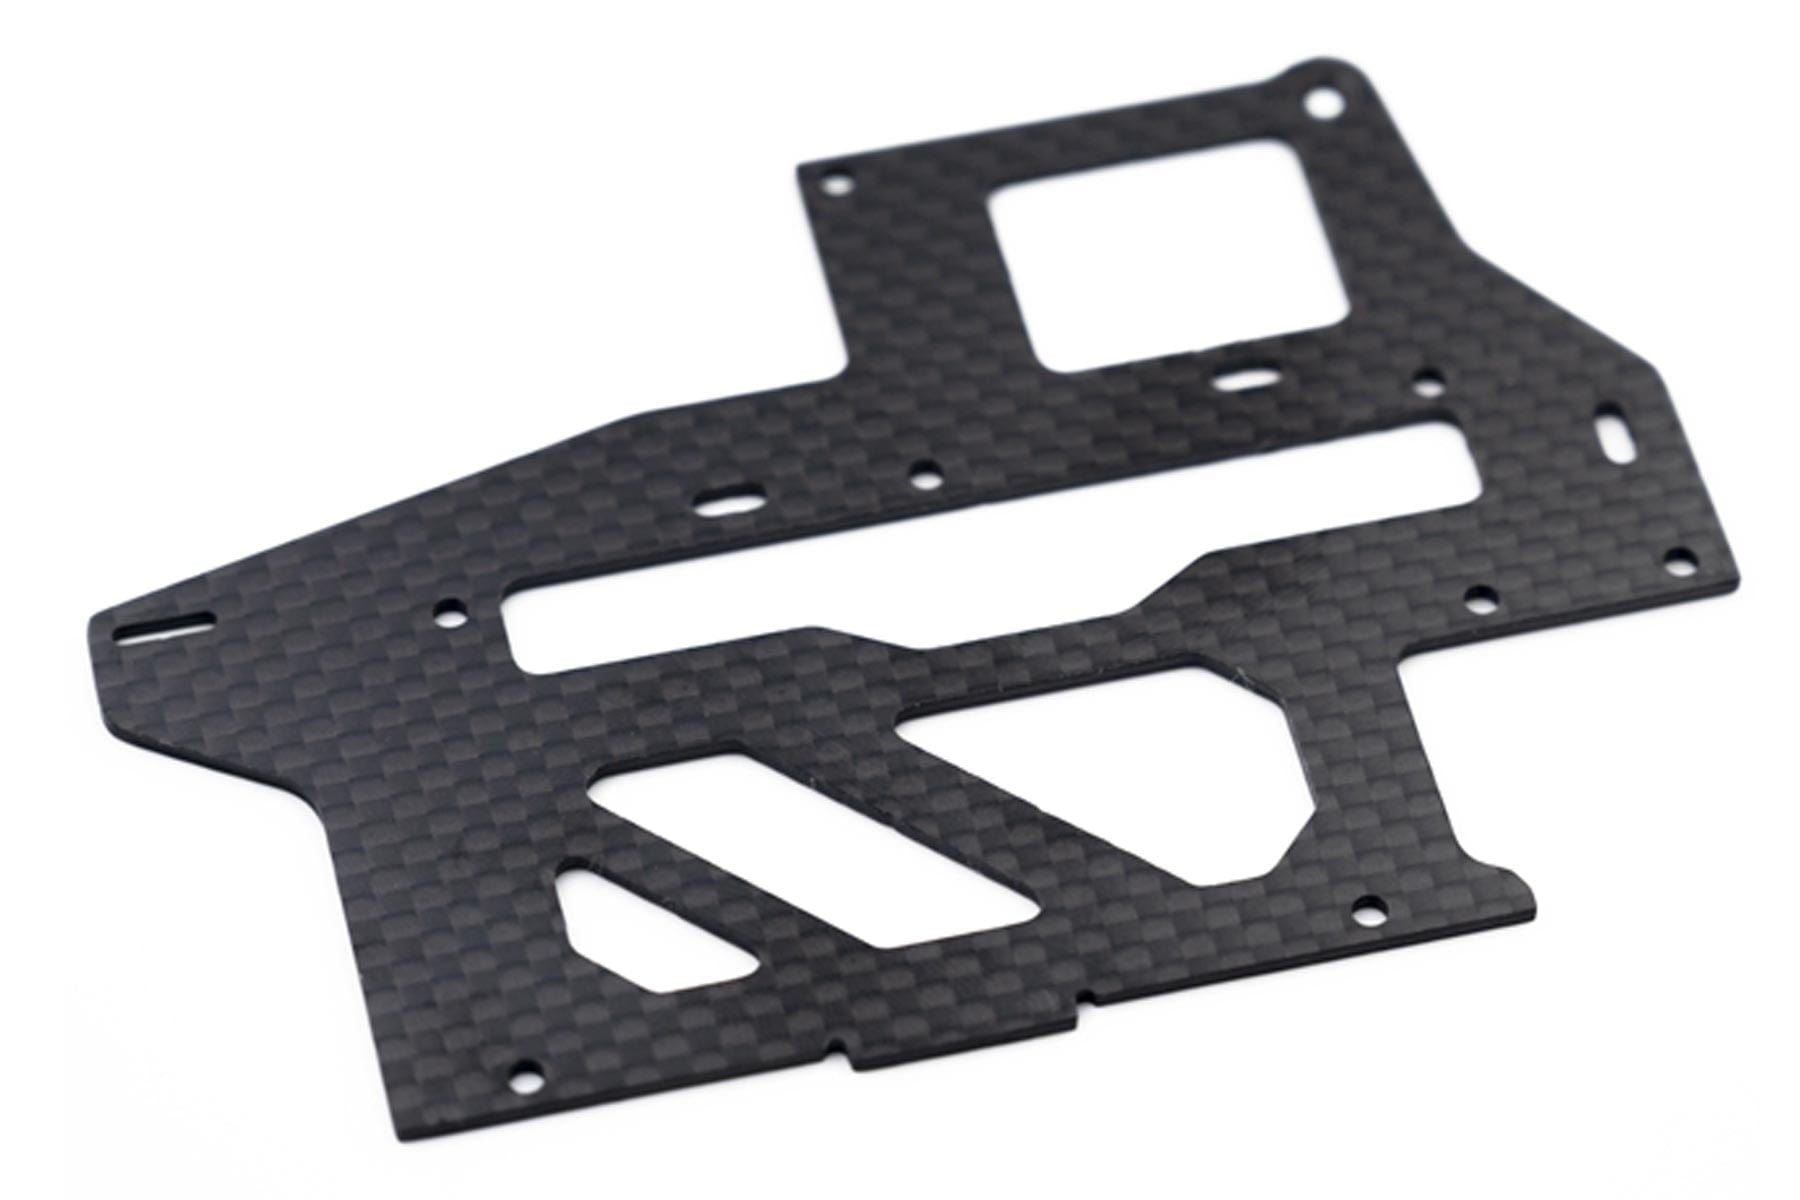 Fly Wing 450 Size UH-1 Huey Carbon Fiber Main Frame RSH1012-105